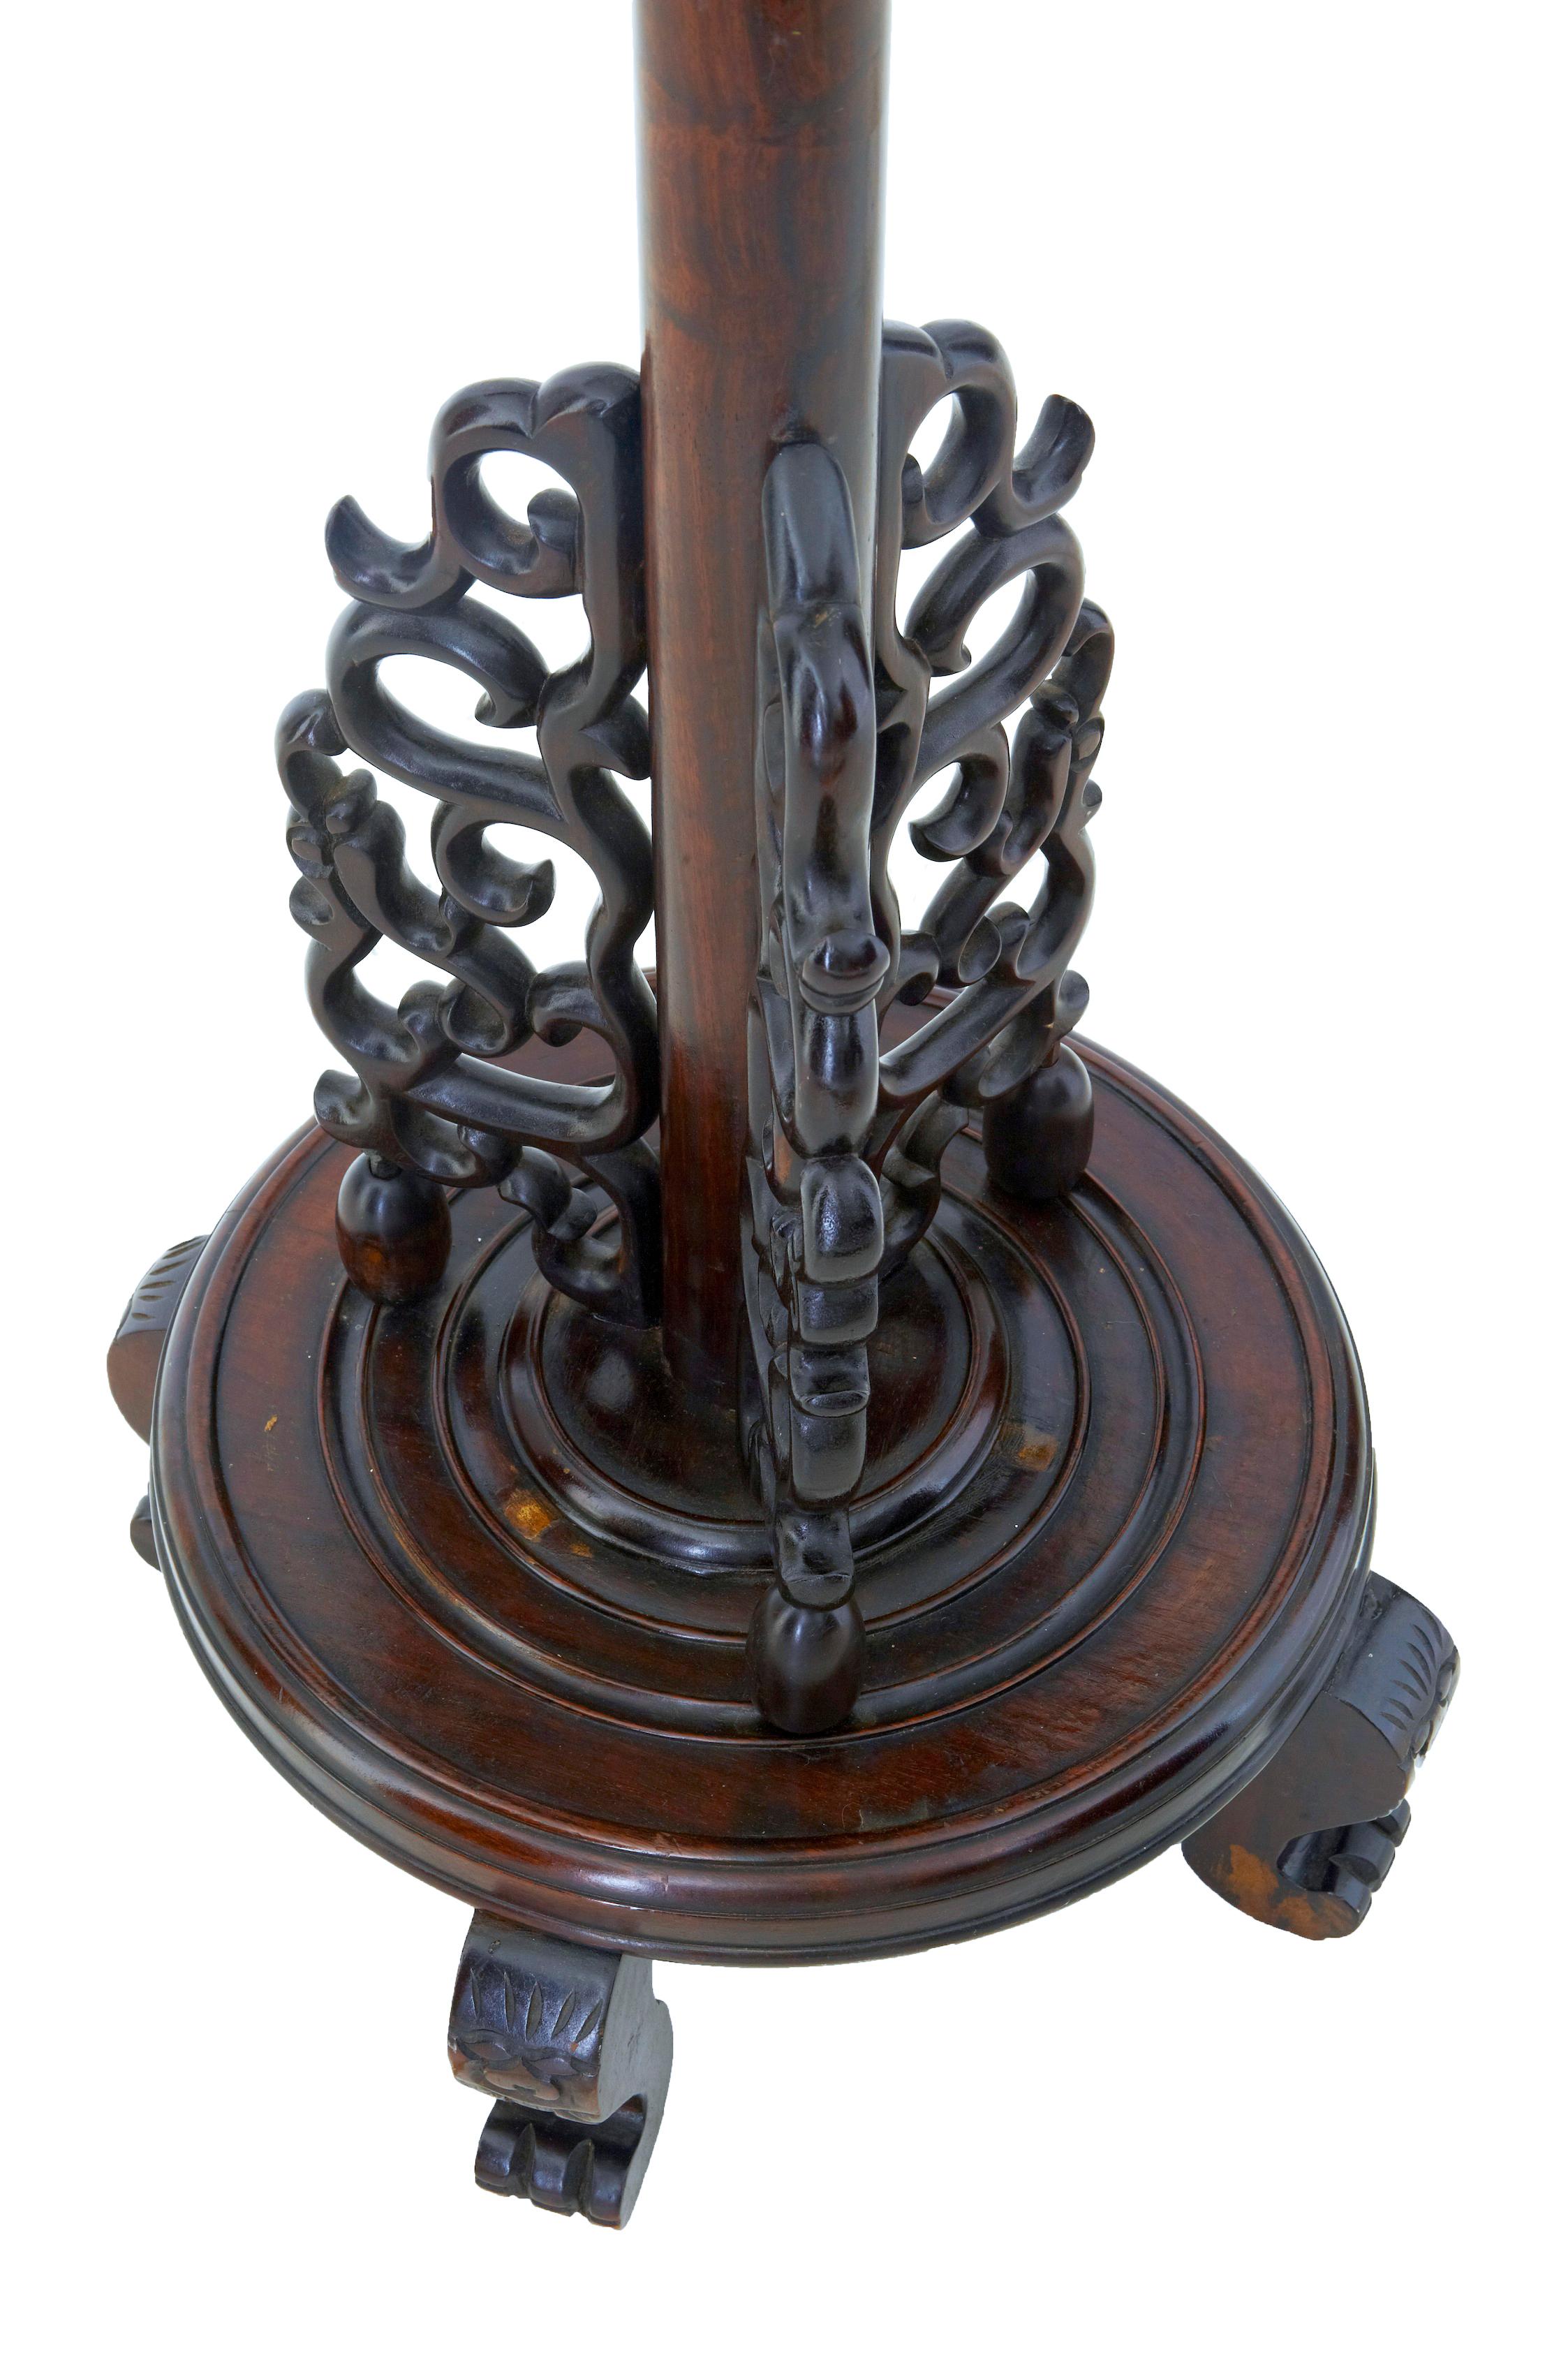 Early 20th century carved Chinese hard wood floor lamp, circa 1920.

Carved in heavy hardwood. Carved dragons head forming the outlet for the light fitment, long stem leading down to 3 scrolled carved elements, round base, standing on 4 feet. This